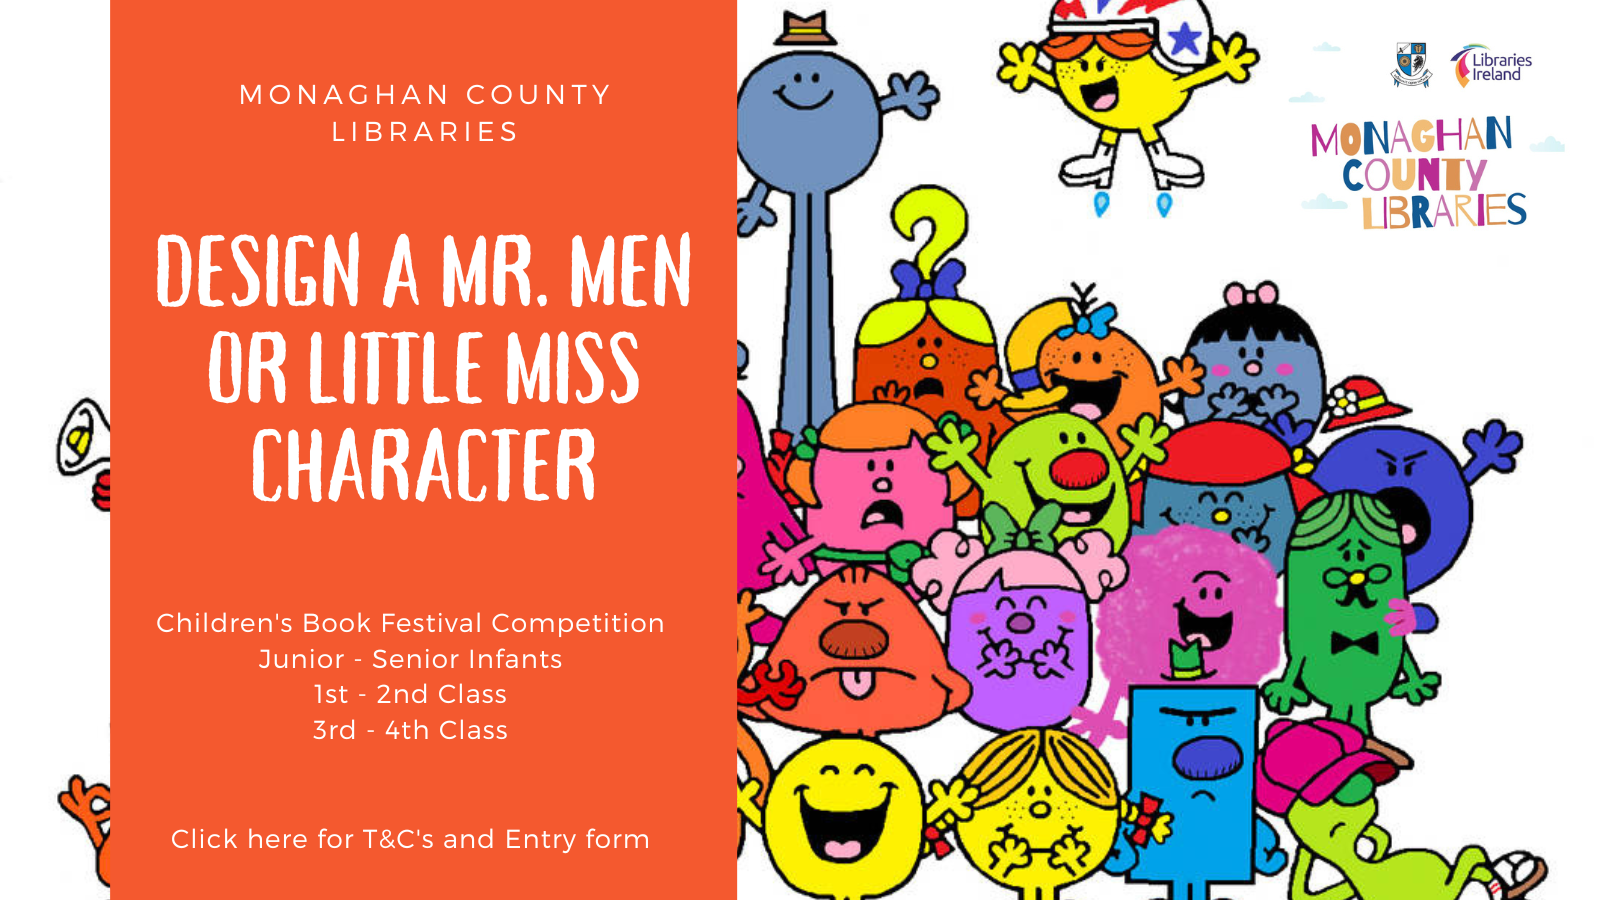 Design a Mr Men or Little Miss Character - Library